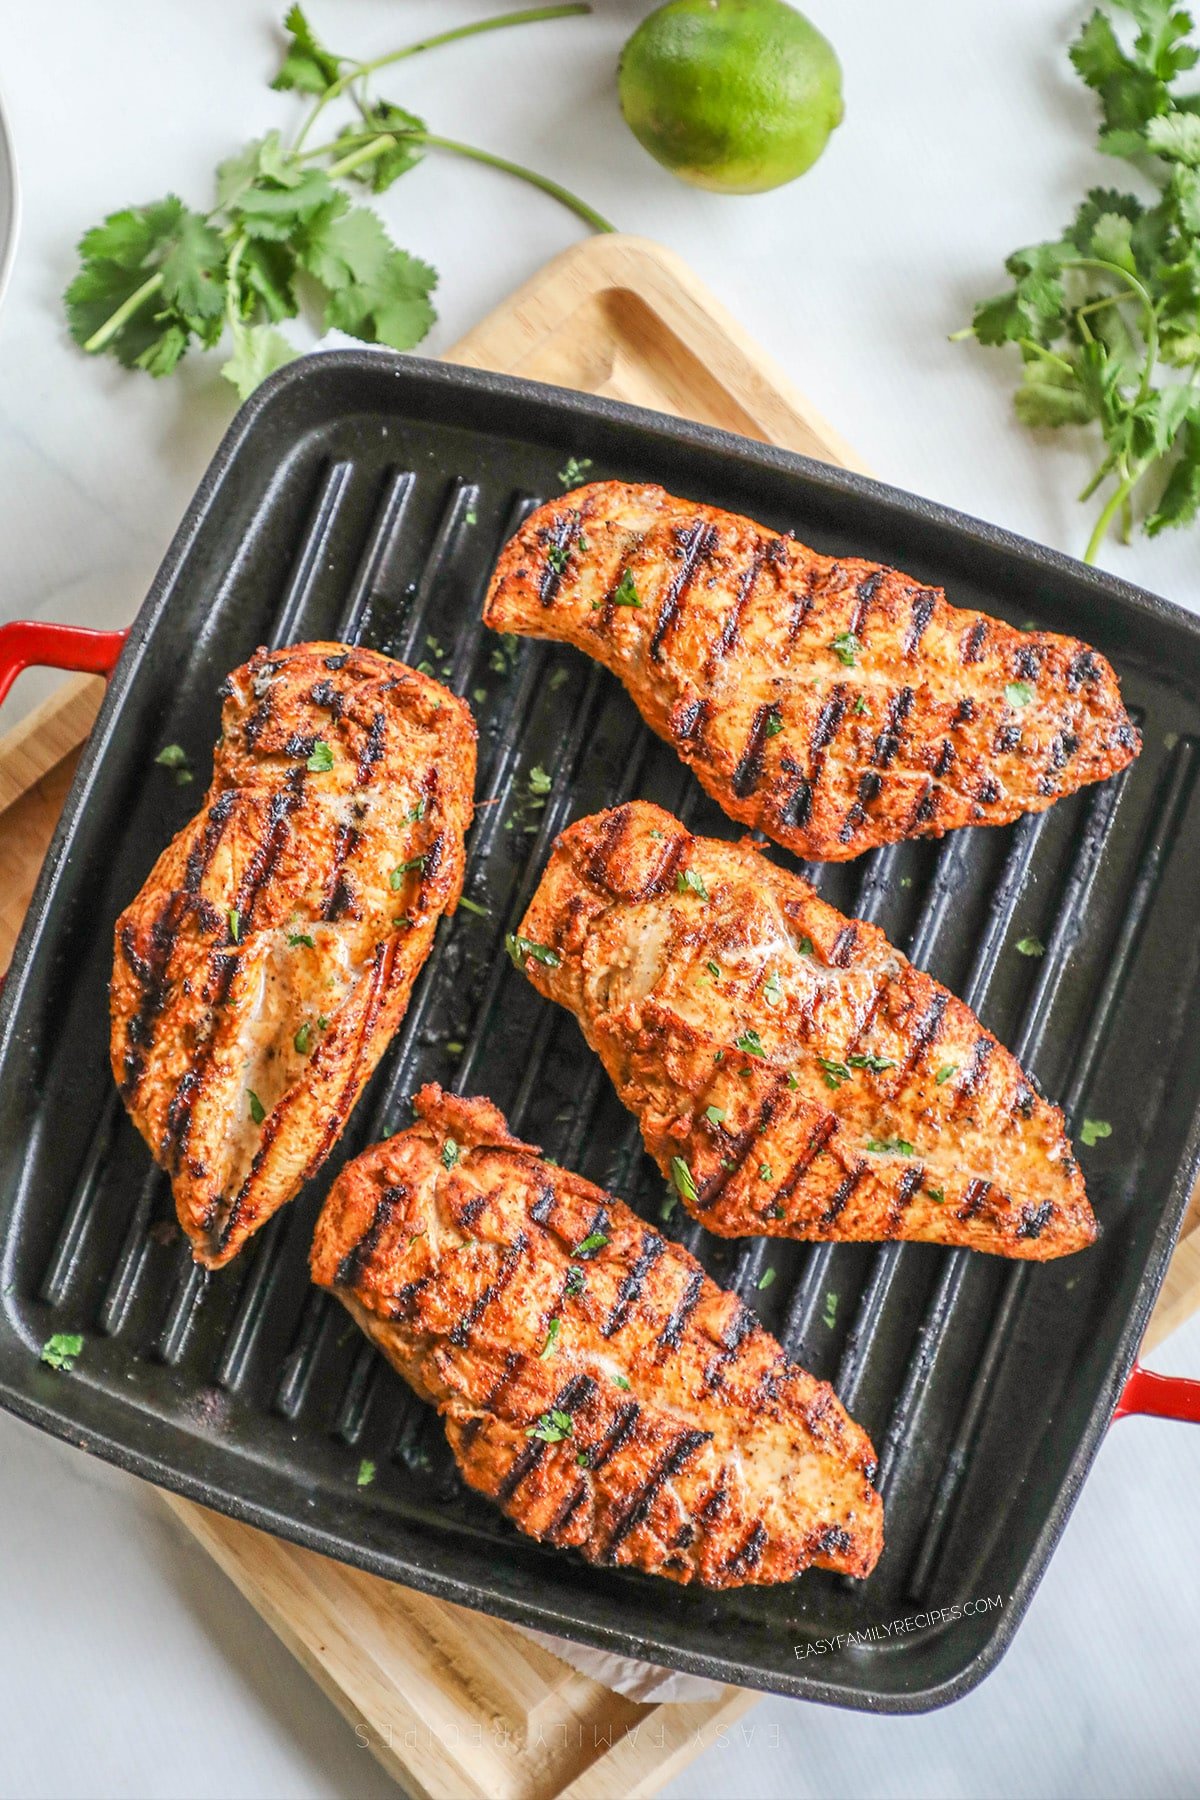 Southwest grilled chicken on a grill pan.